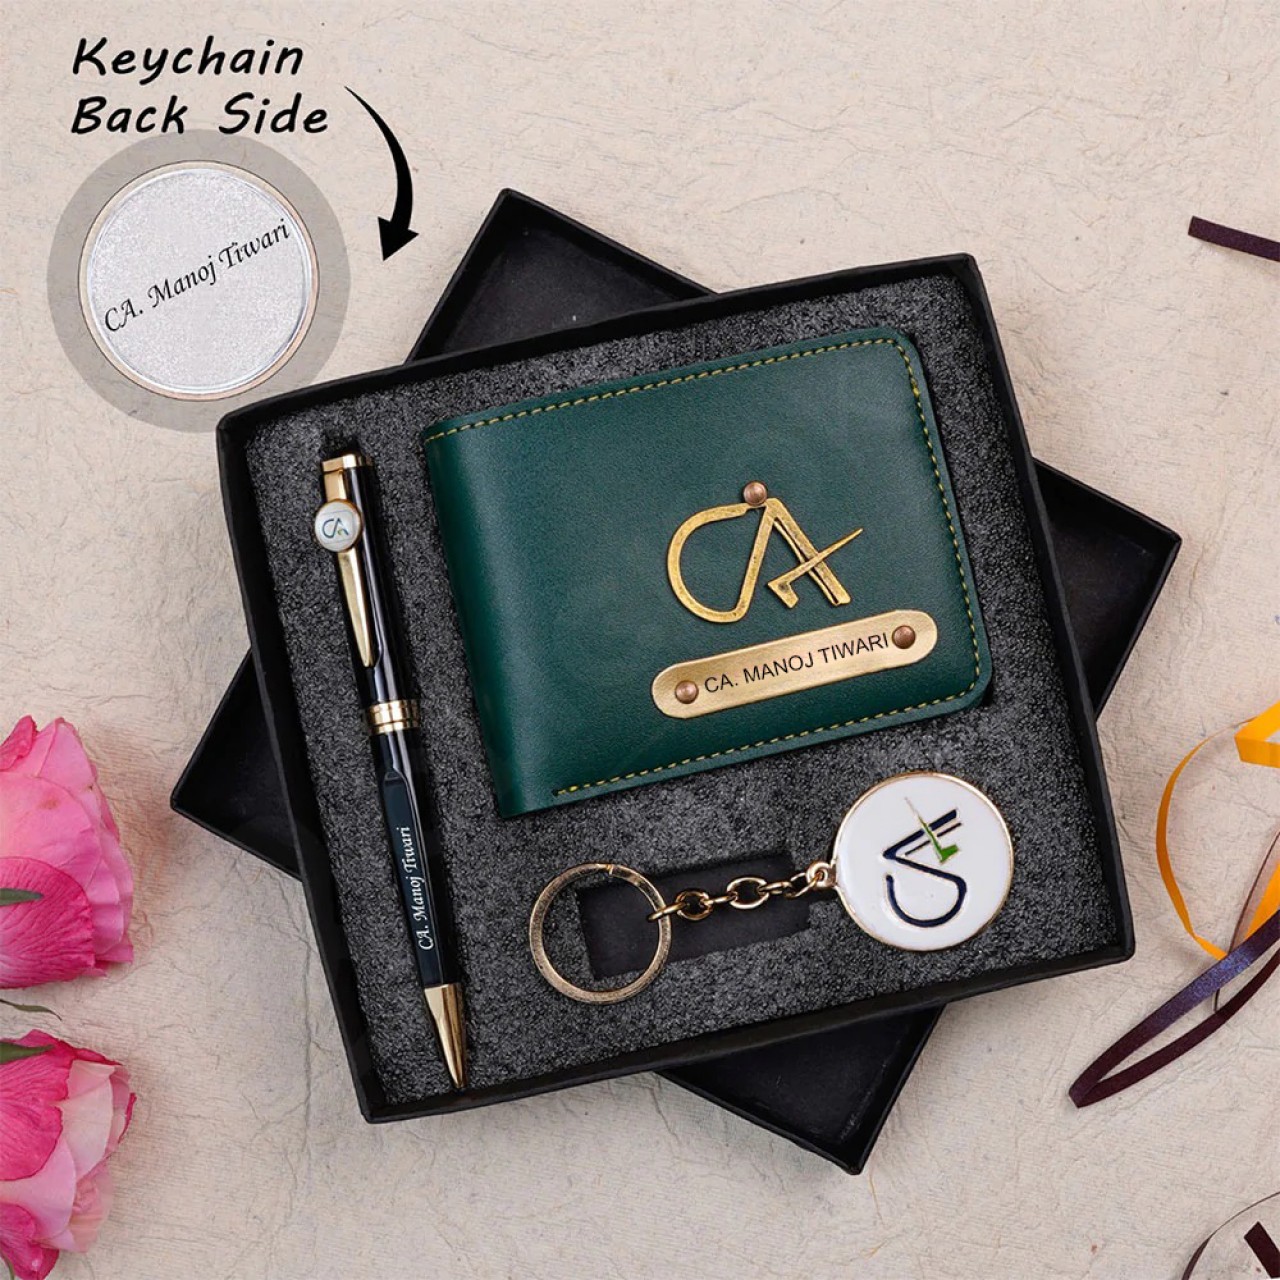 Personalized Wallet Pen & Key Chain Set For CA